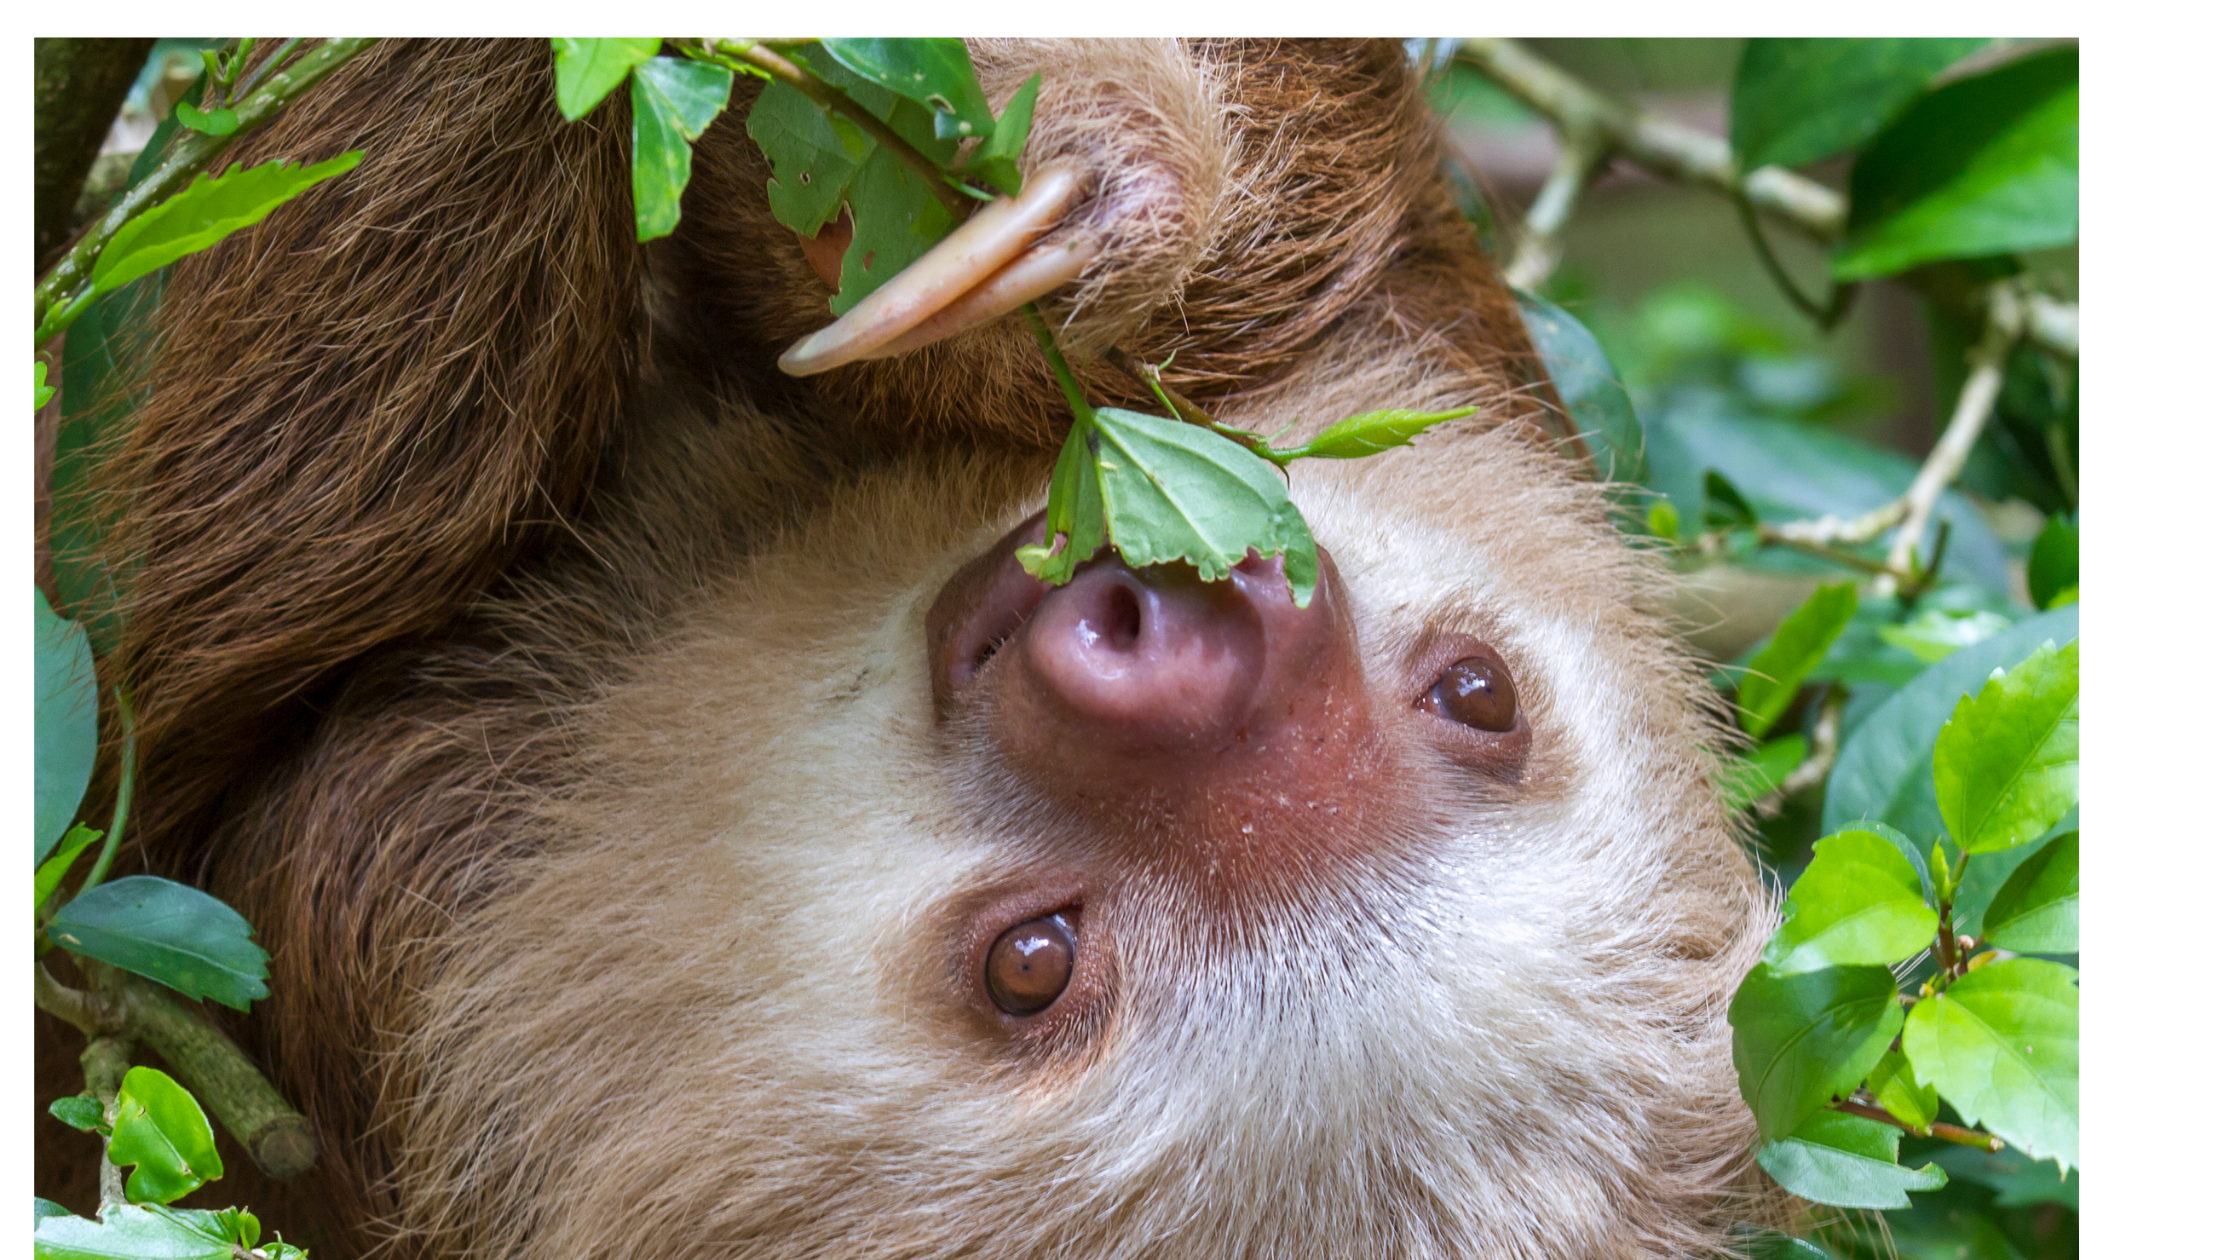 sloth munching on leaves and twigs